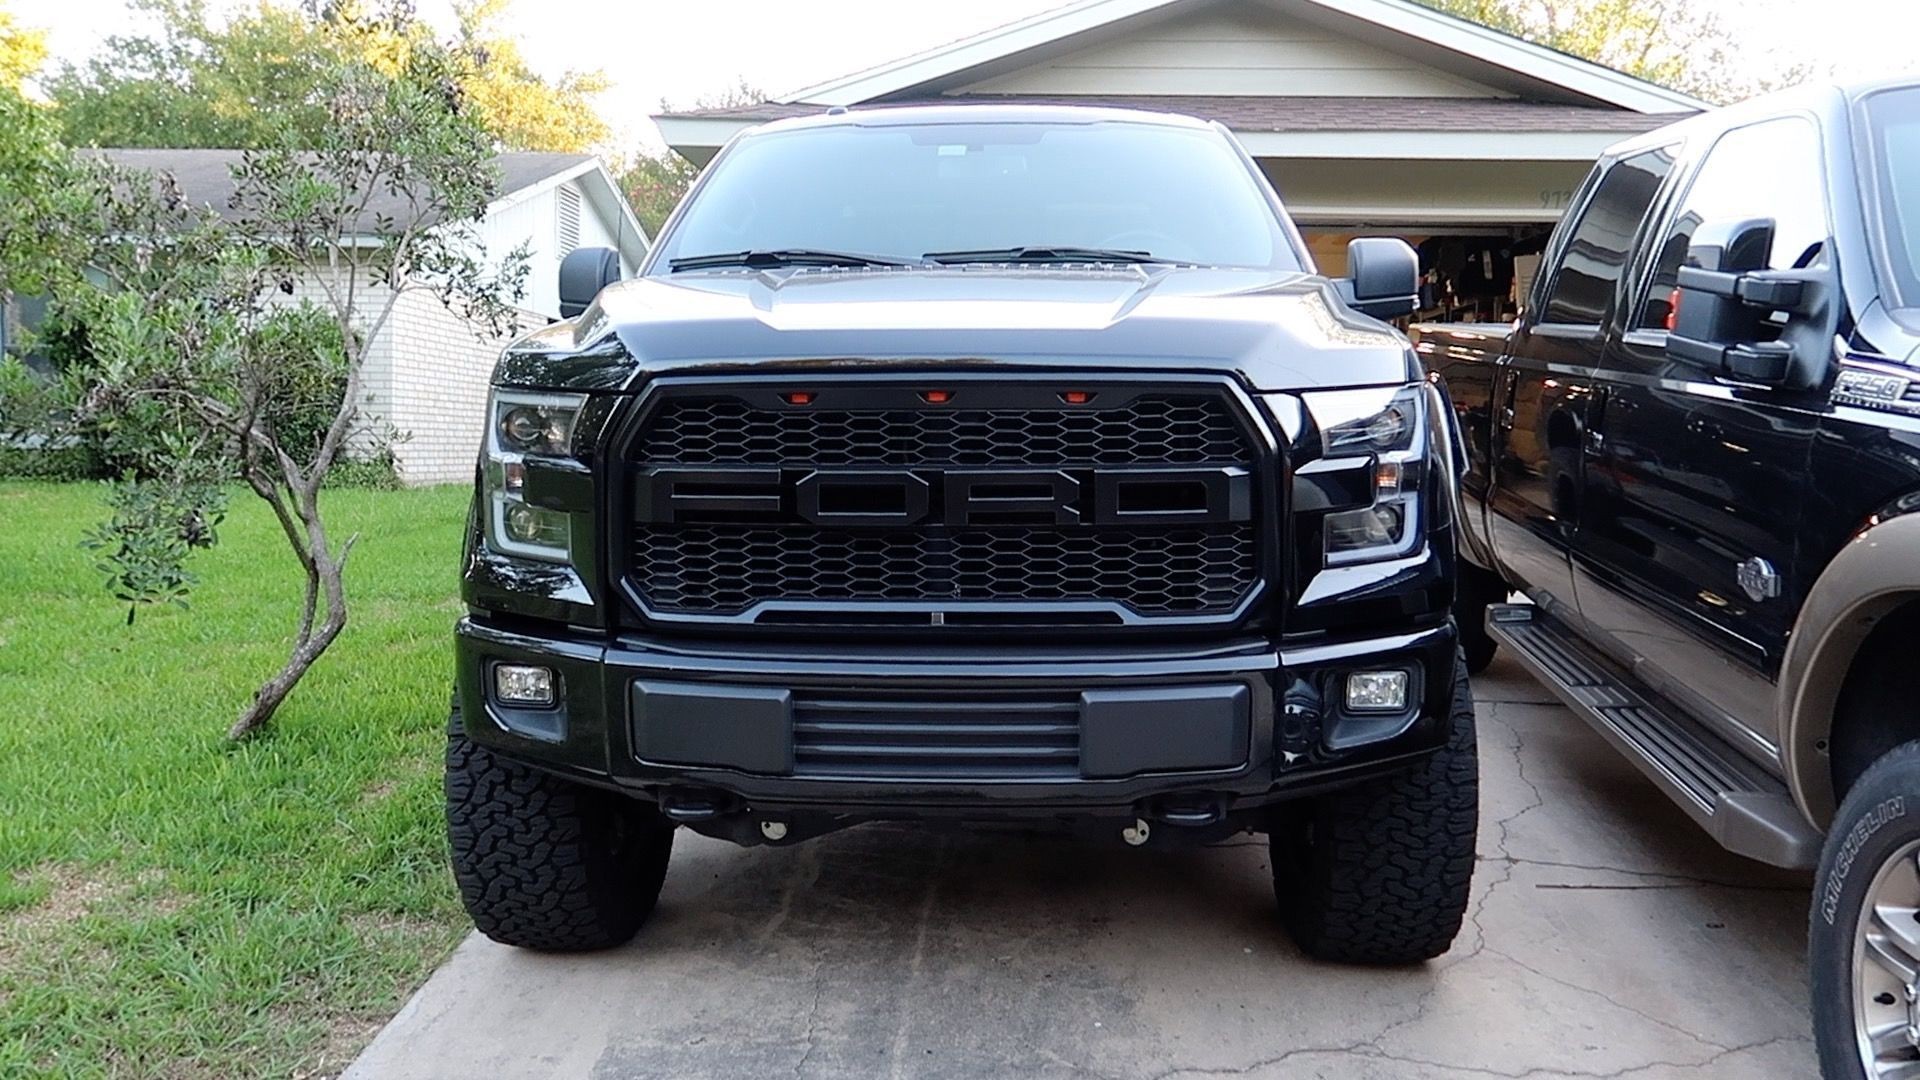 Raptor style grille anzo headlights pictures review Page 4 Ford F150 Forum munity of Ford Truck Fans